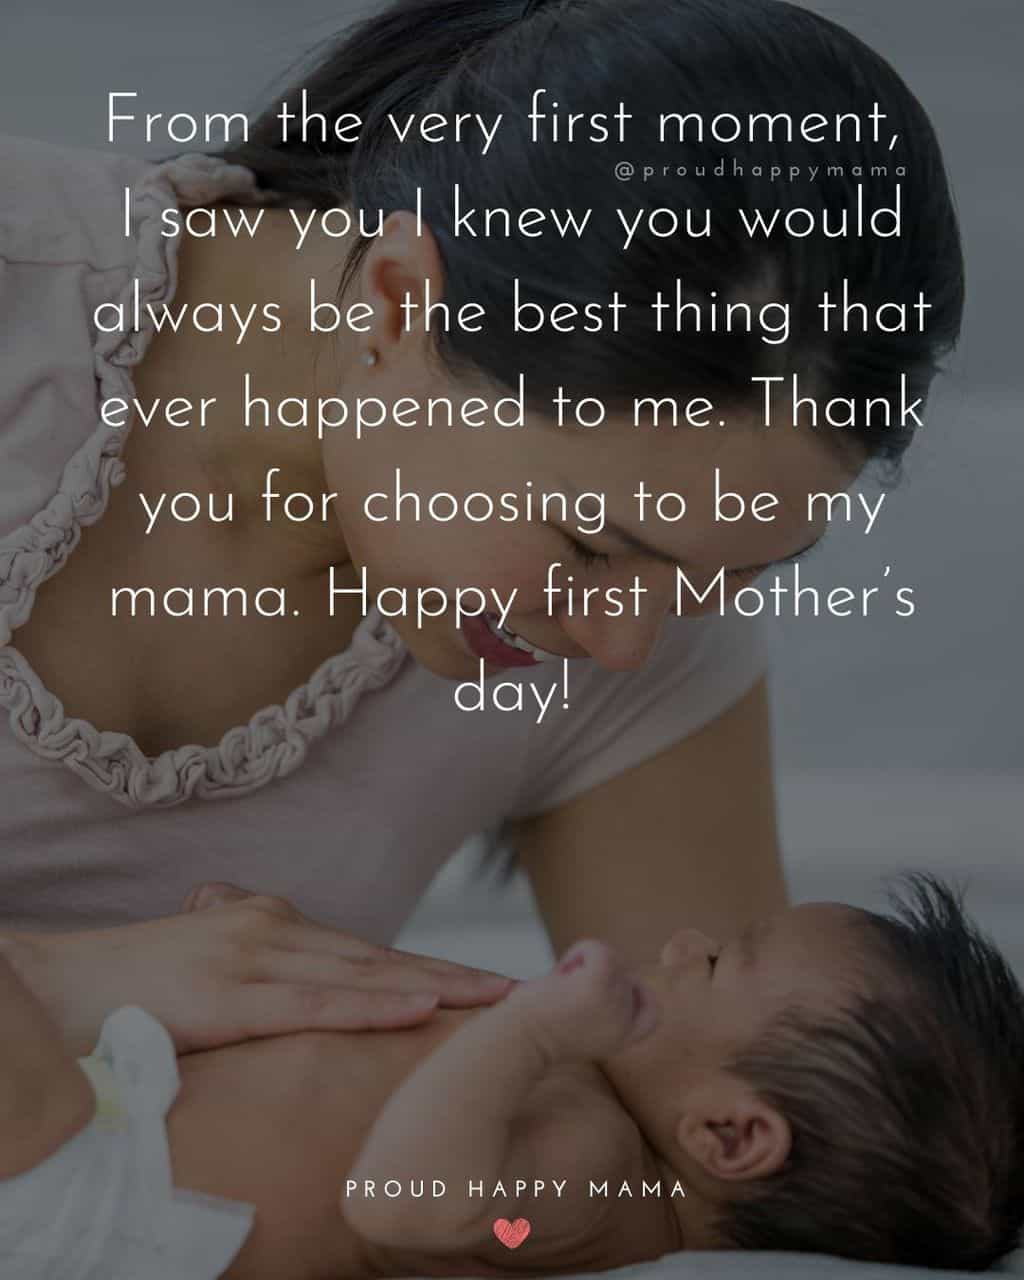 First Mothers Day Quotes - From the very first moment, I saw you I knew you would always be the best thing that ever happened to me.